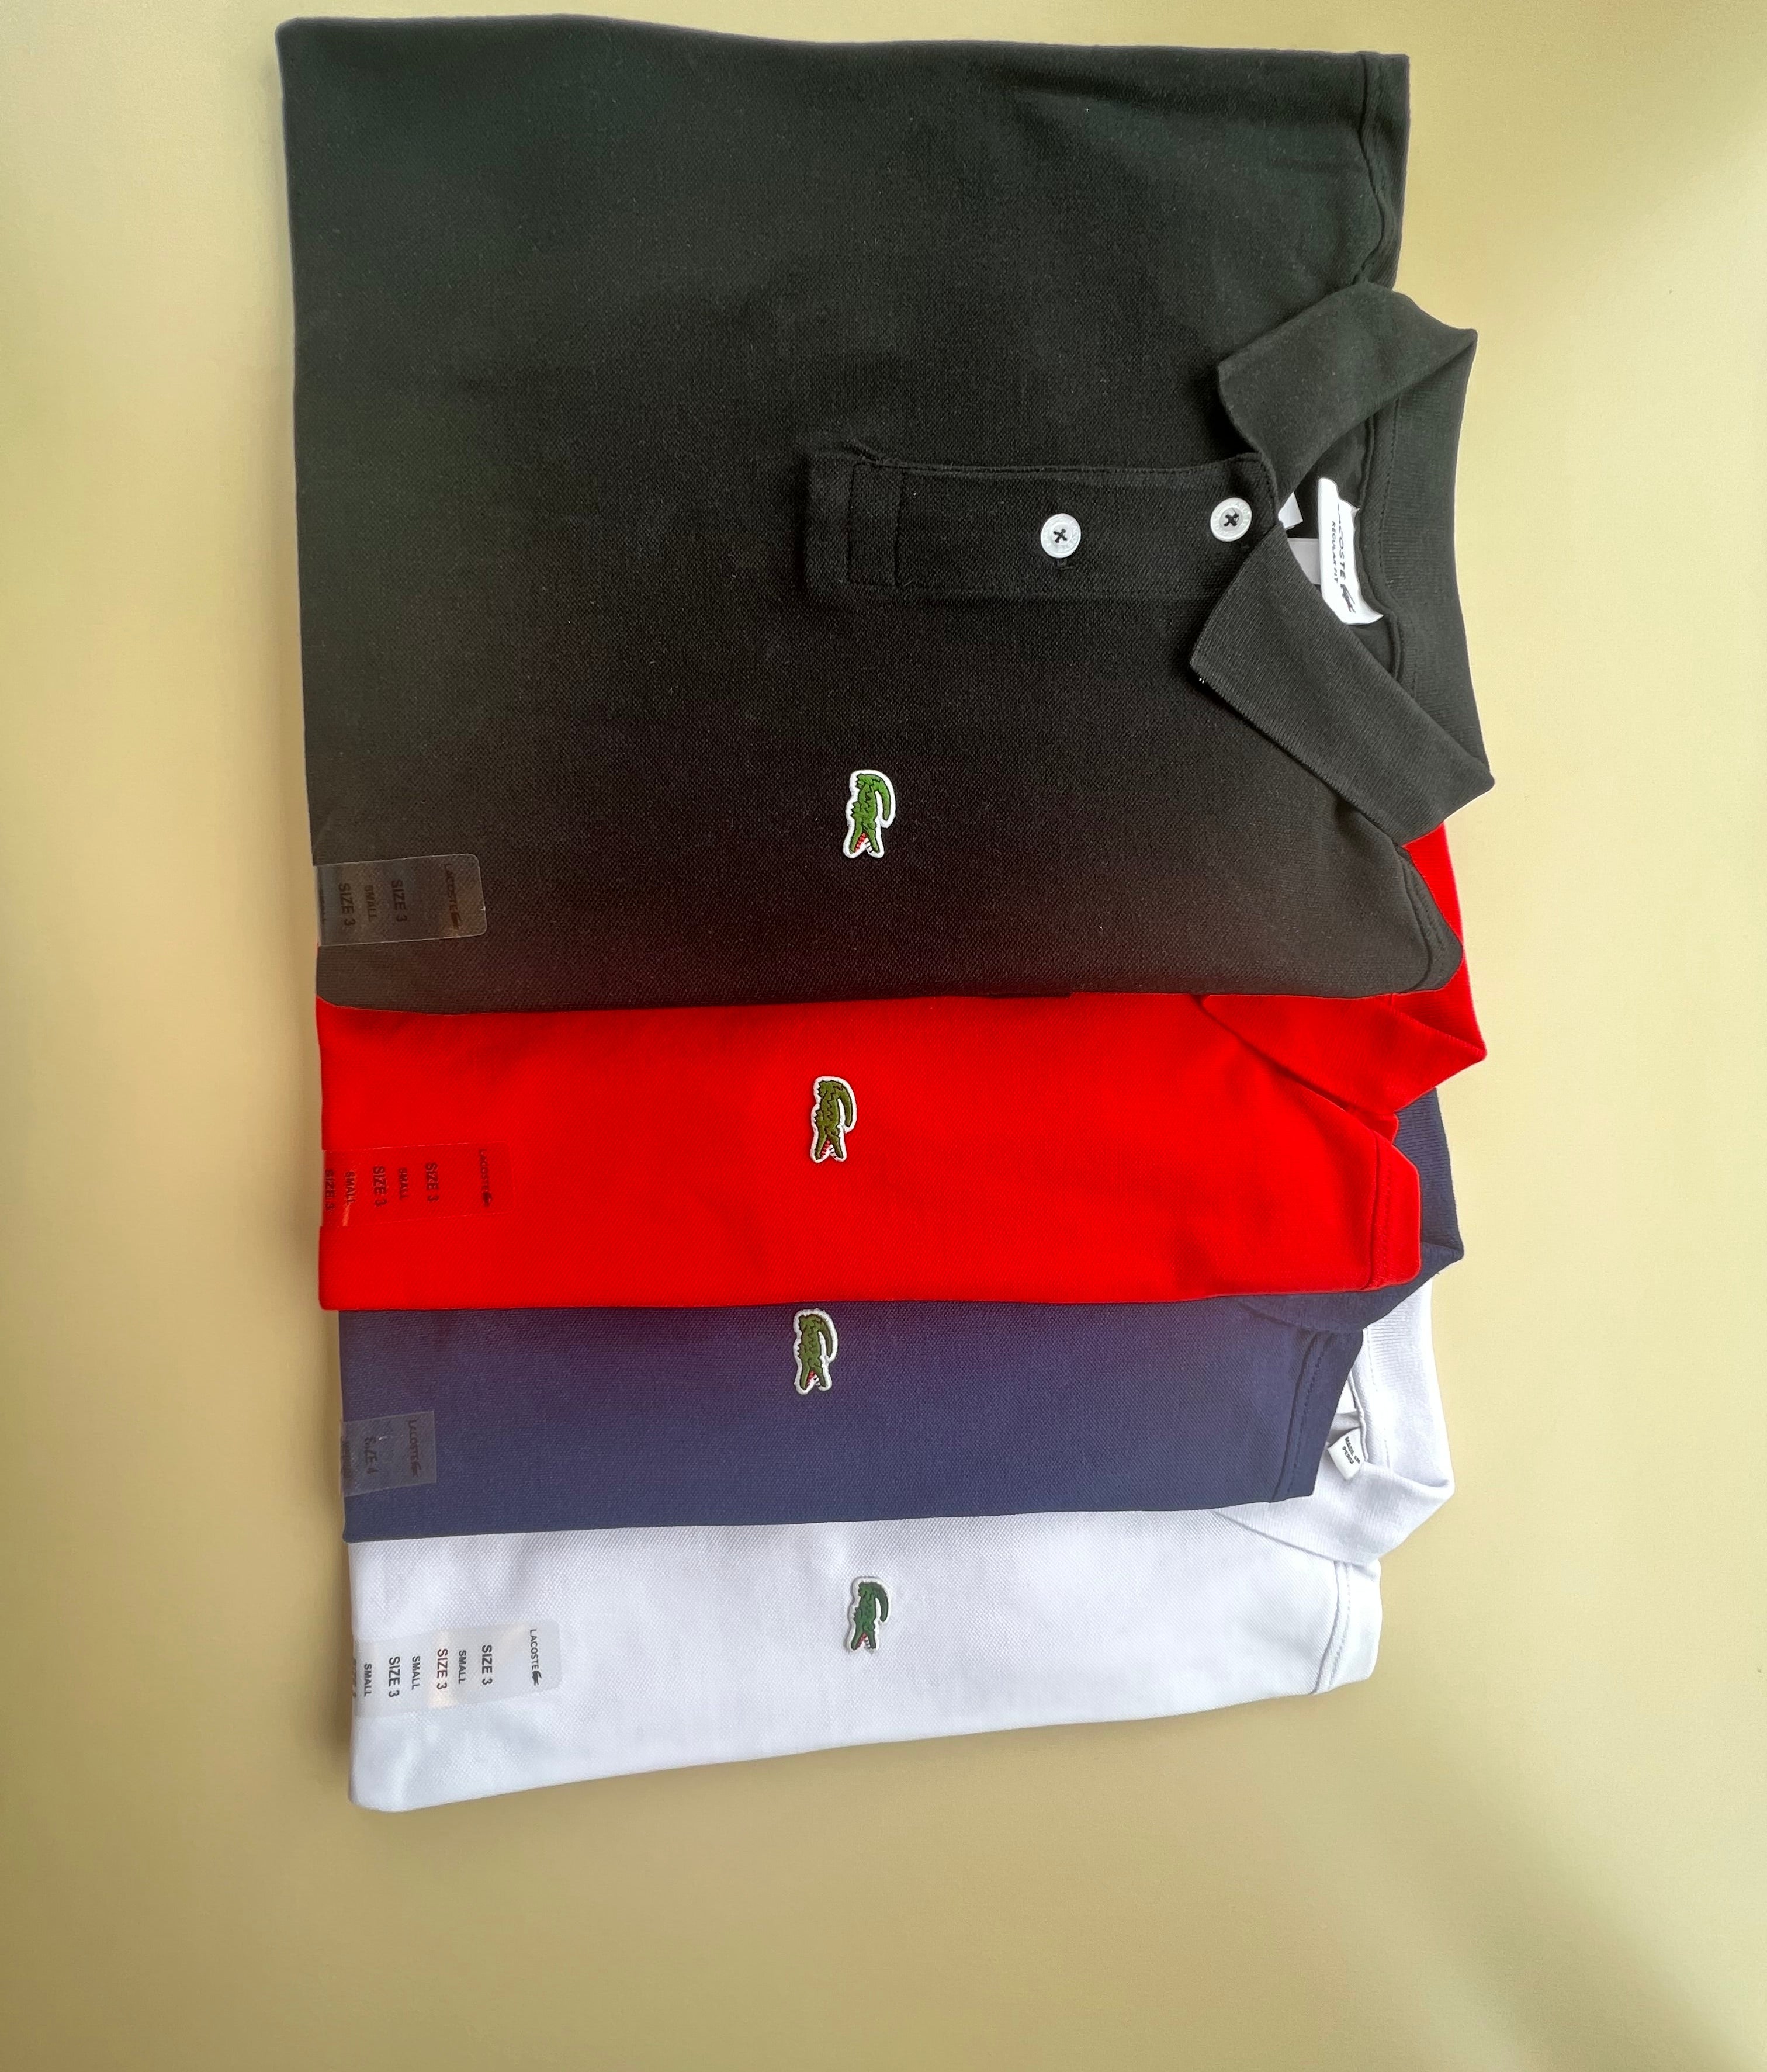 Lacoste polo T-Shirt SnD Clothing